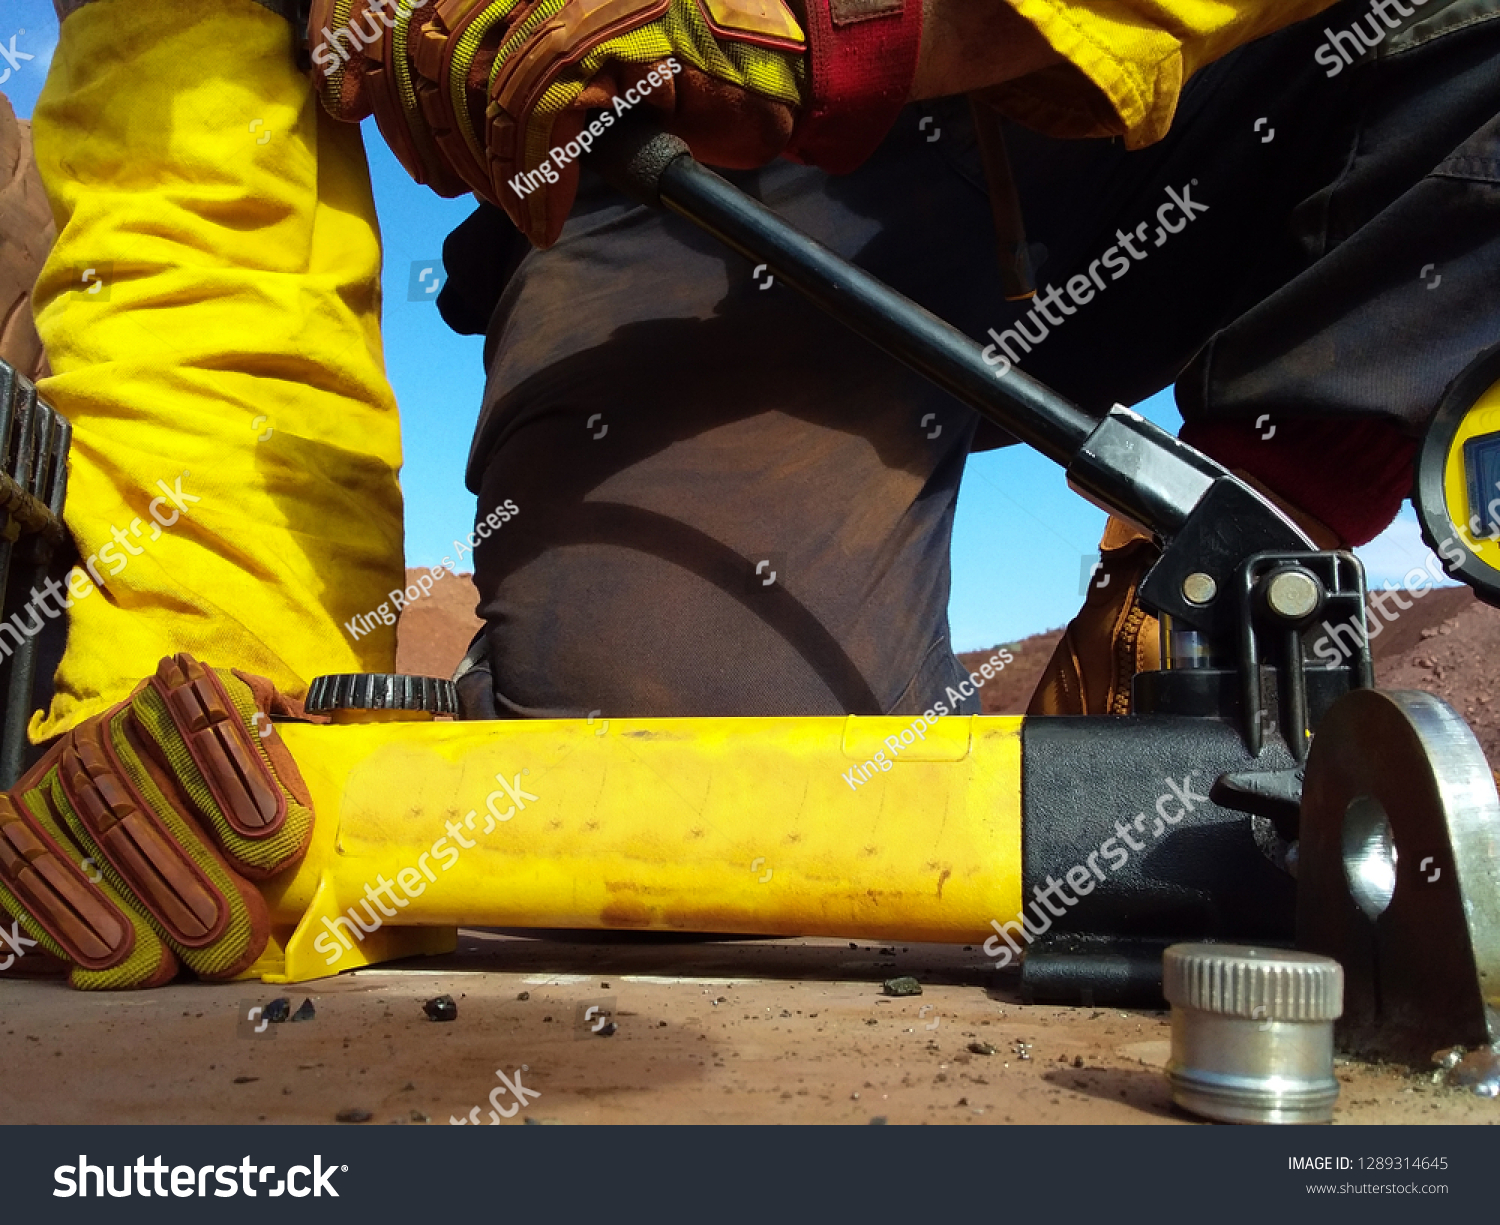 Rope access technician engineer worker hand holding pushing pull tester handle while testing pulling lifting lug load prior to lifting heavy loads construction mine site, Perth, Australia  #1289314645